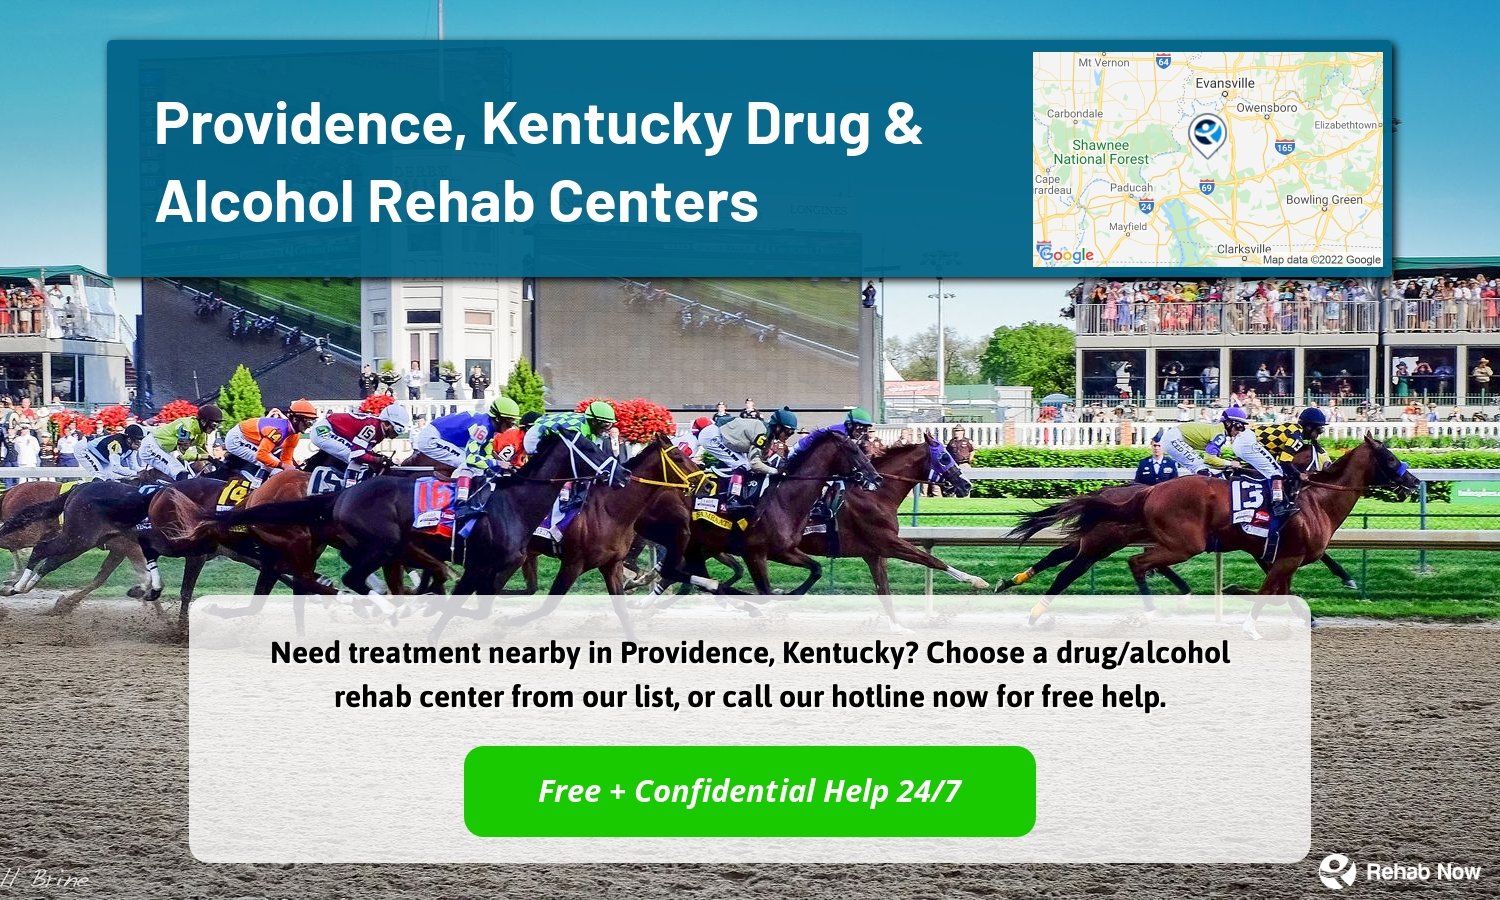 Need treatment nearby in Providence, Kentucky? Choose a drug/alcohol rehab center from our list, or call our hotline now for free help.